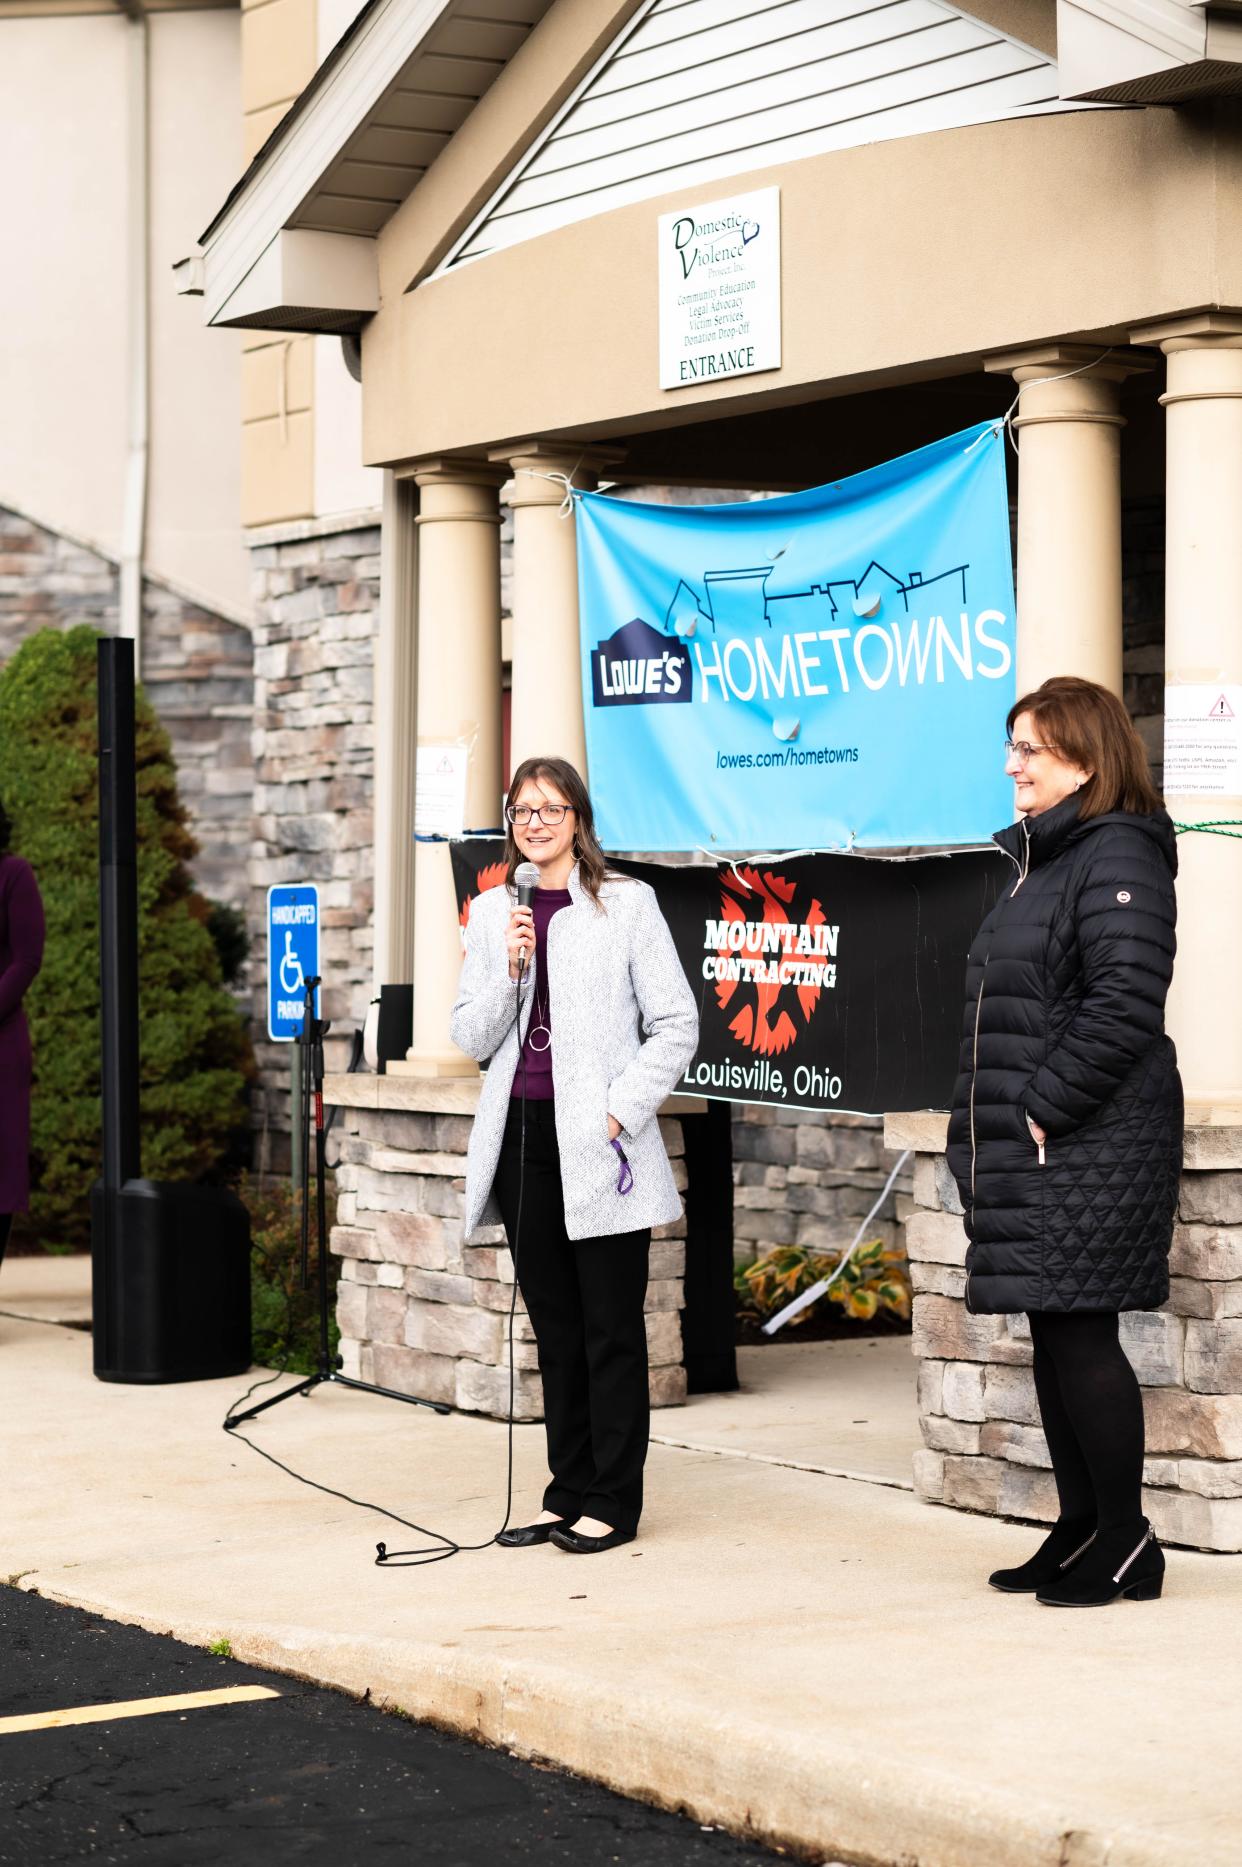 Julie Donant, executive director of the Domestic Violence Project, speaks at its recent open house to dedicate newly renovated space through a partnership with Lowe's. Looking on is Randi Smuckler, the agency's board president.